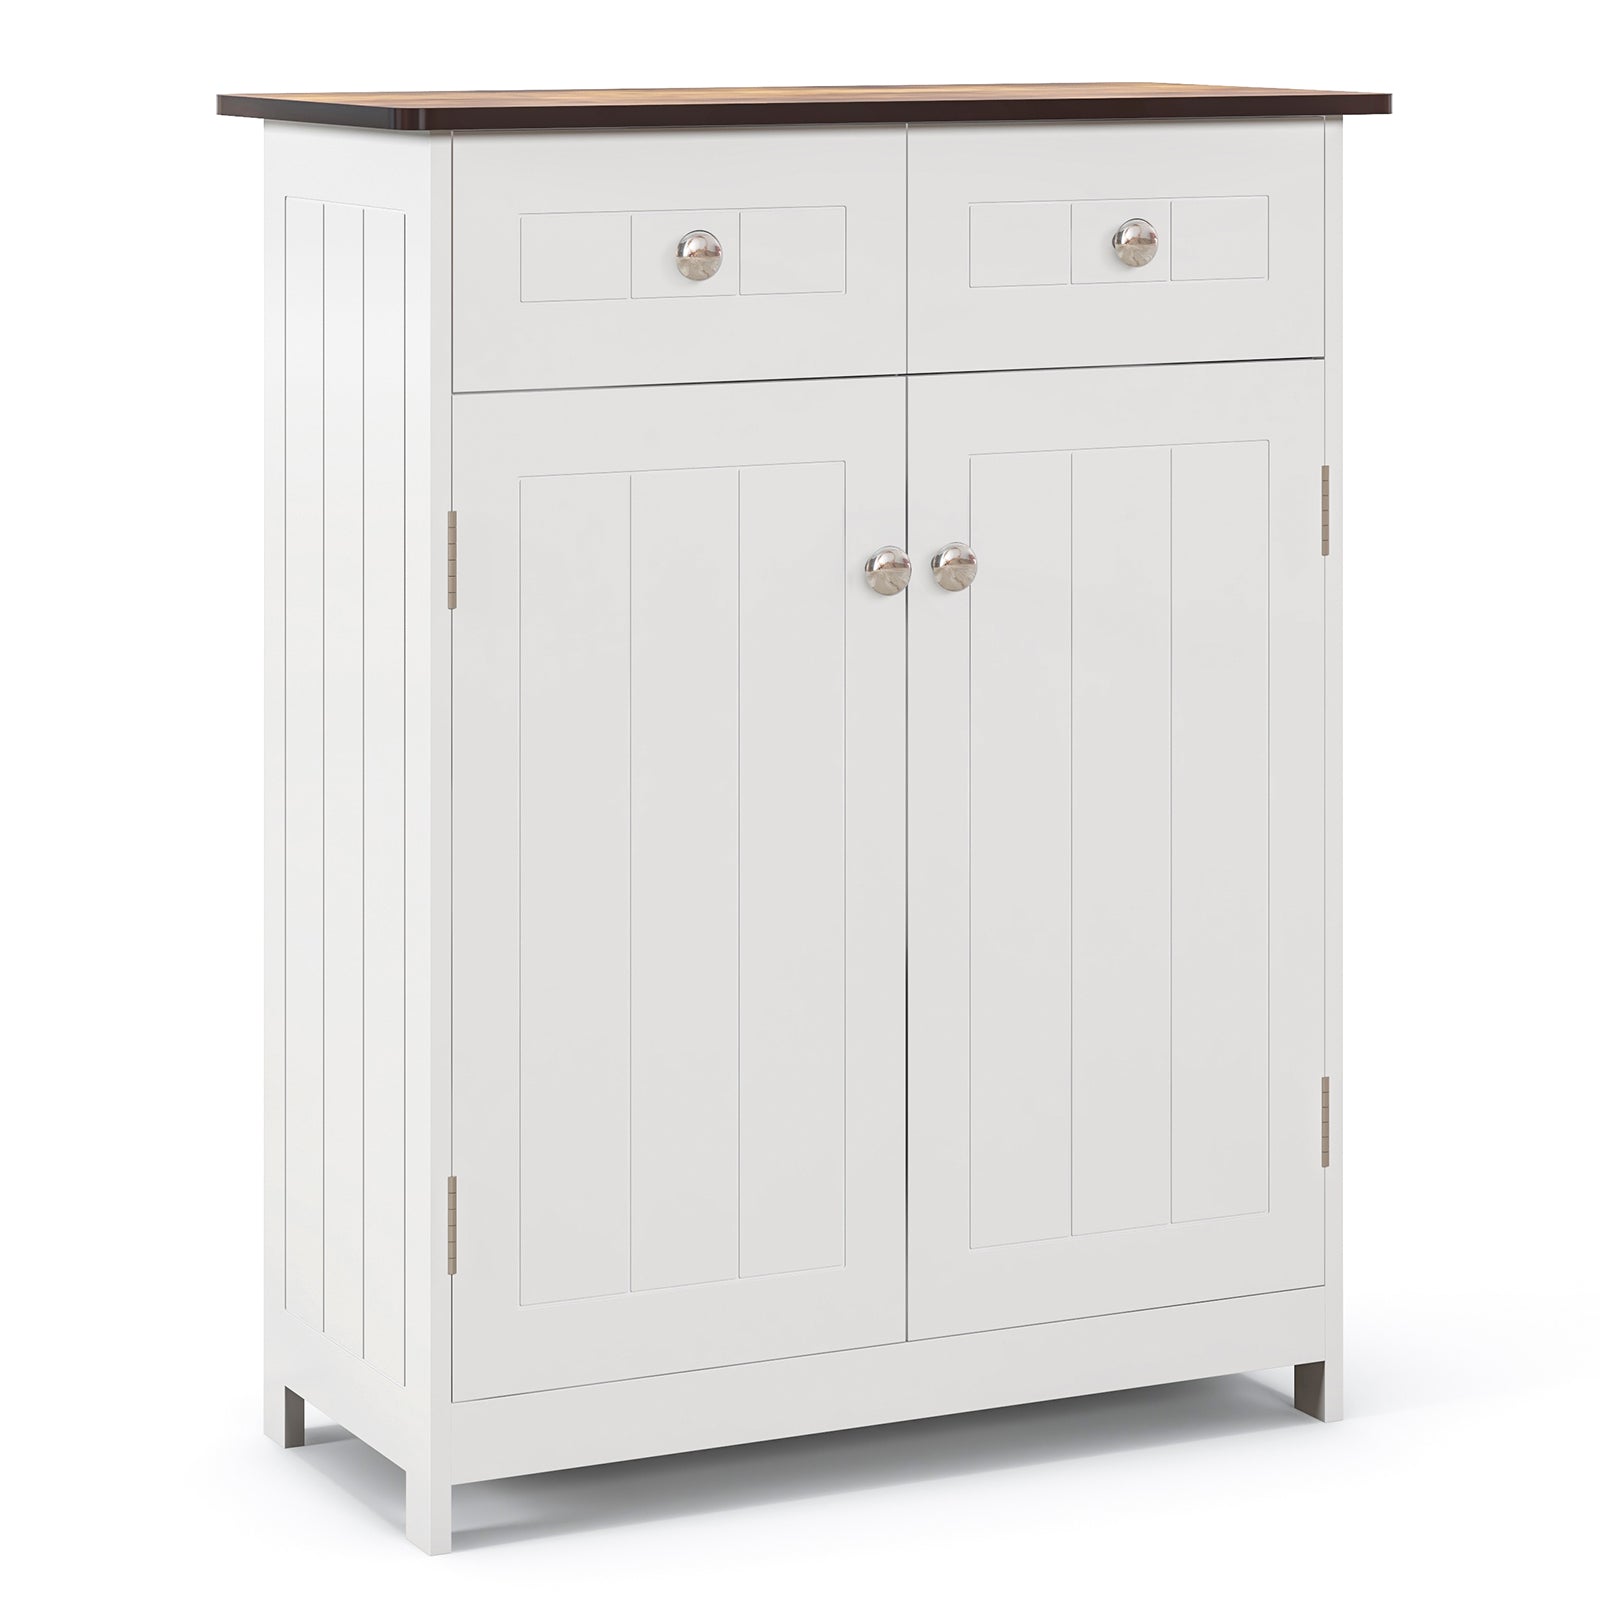 Bathroom Floor Cabinet with 2 Drawers and 2 Doors for Kitchen Entryway-White